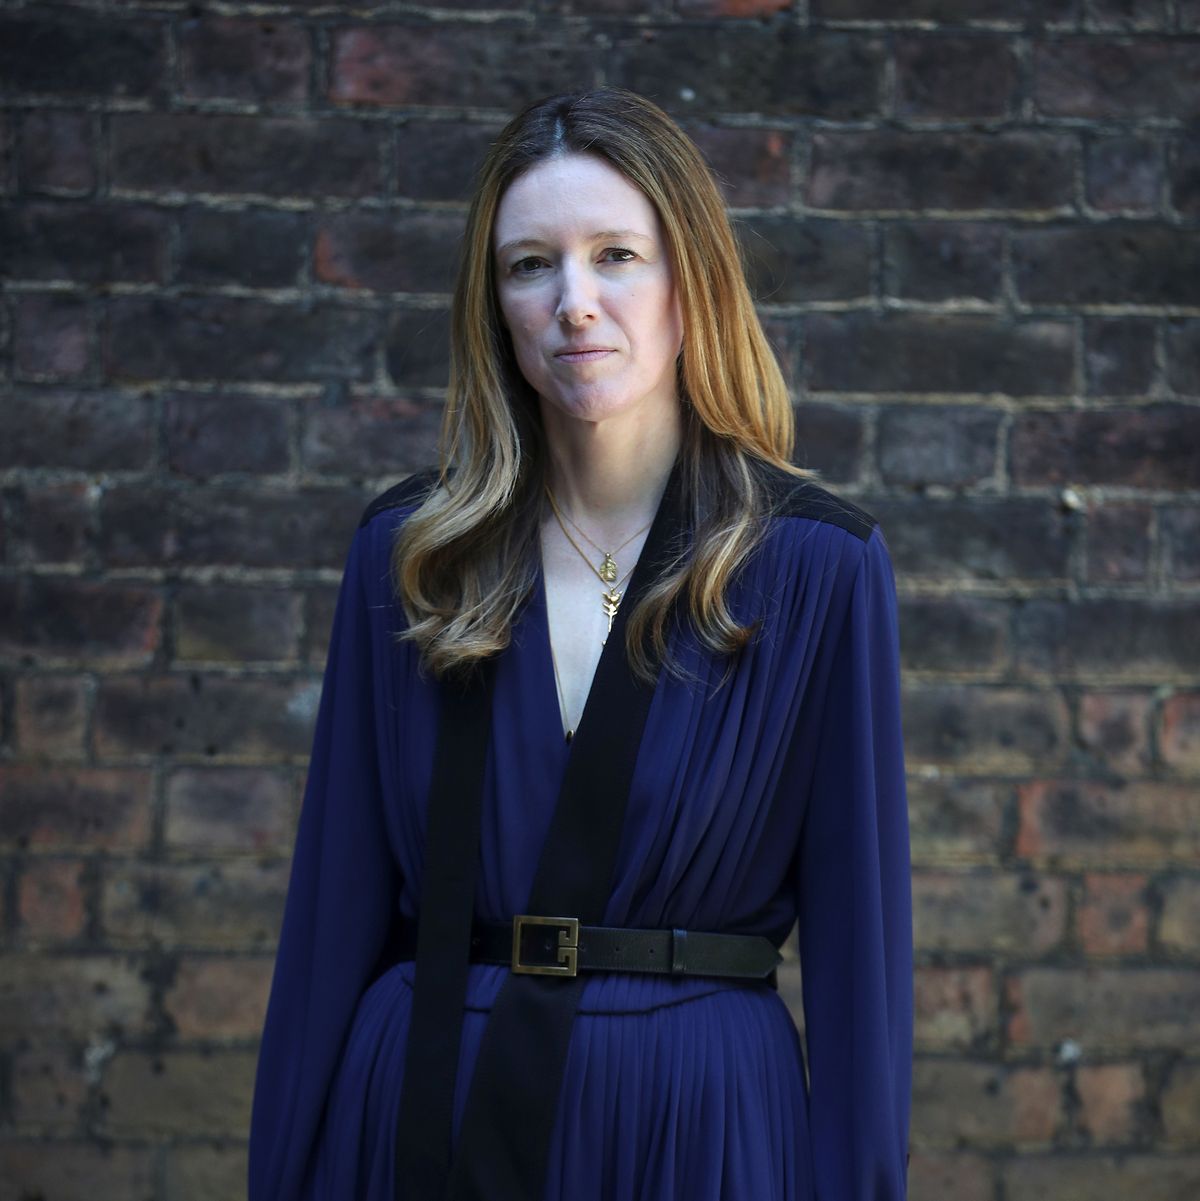 LVMH Owned Givenchy Cut Ties With Designer Clare Waight Keller